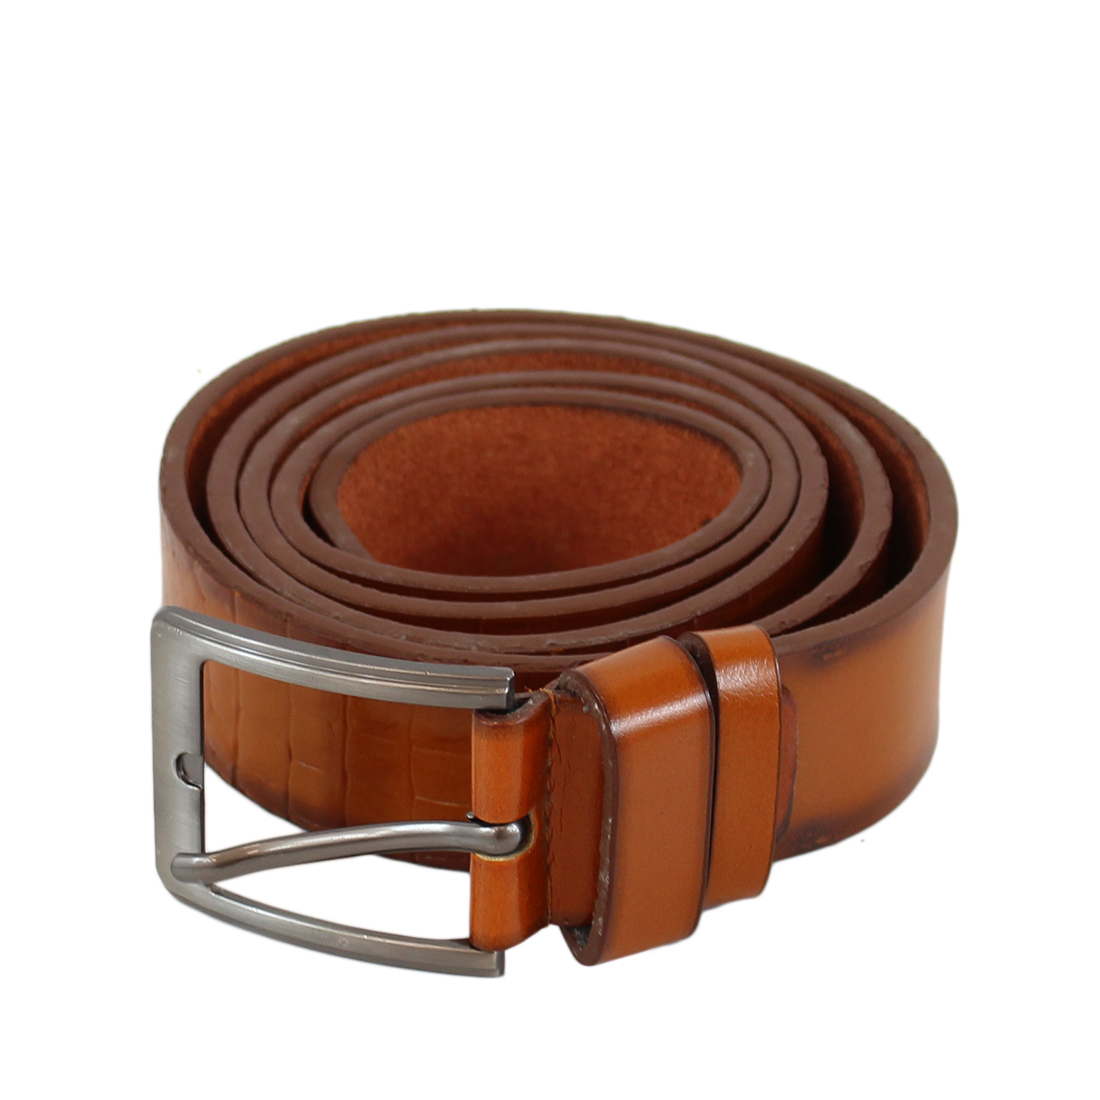 * Plain shiny wide leather belt with silver buckle